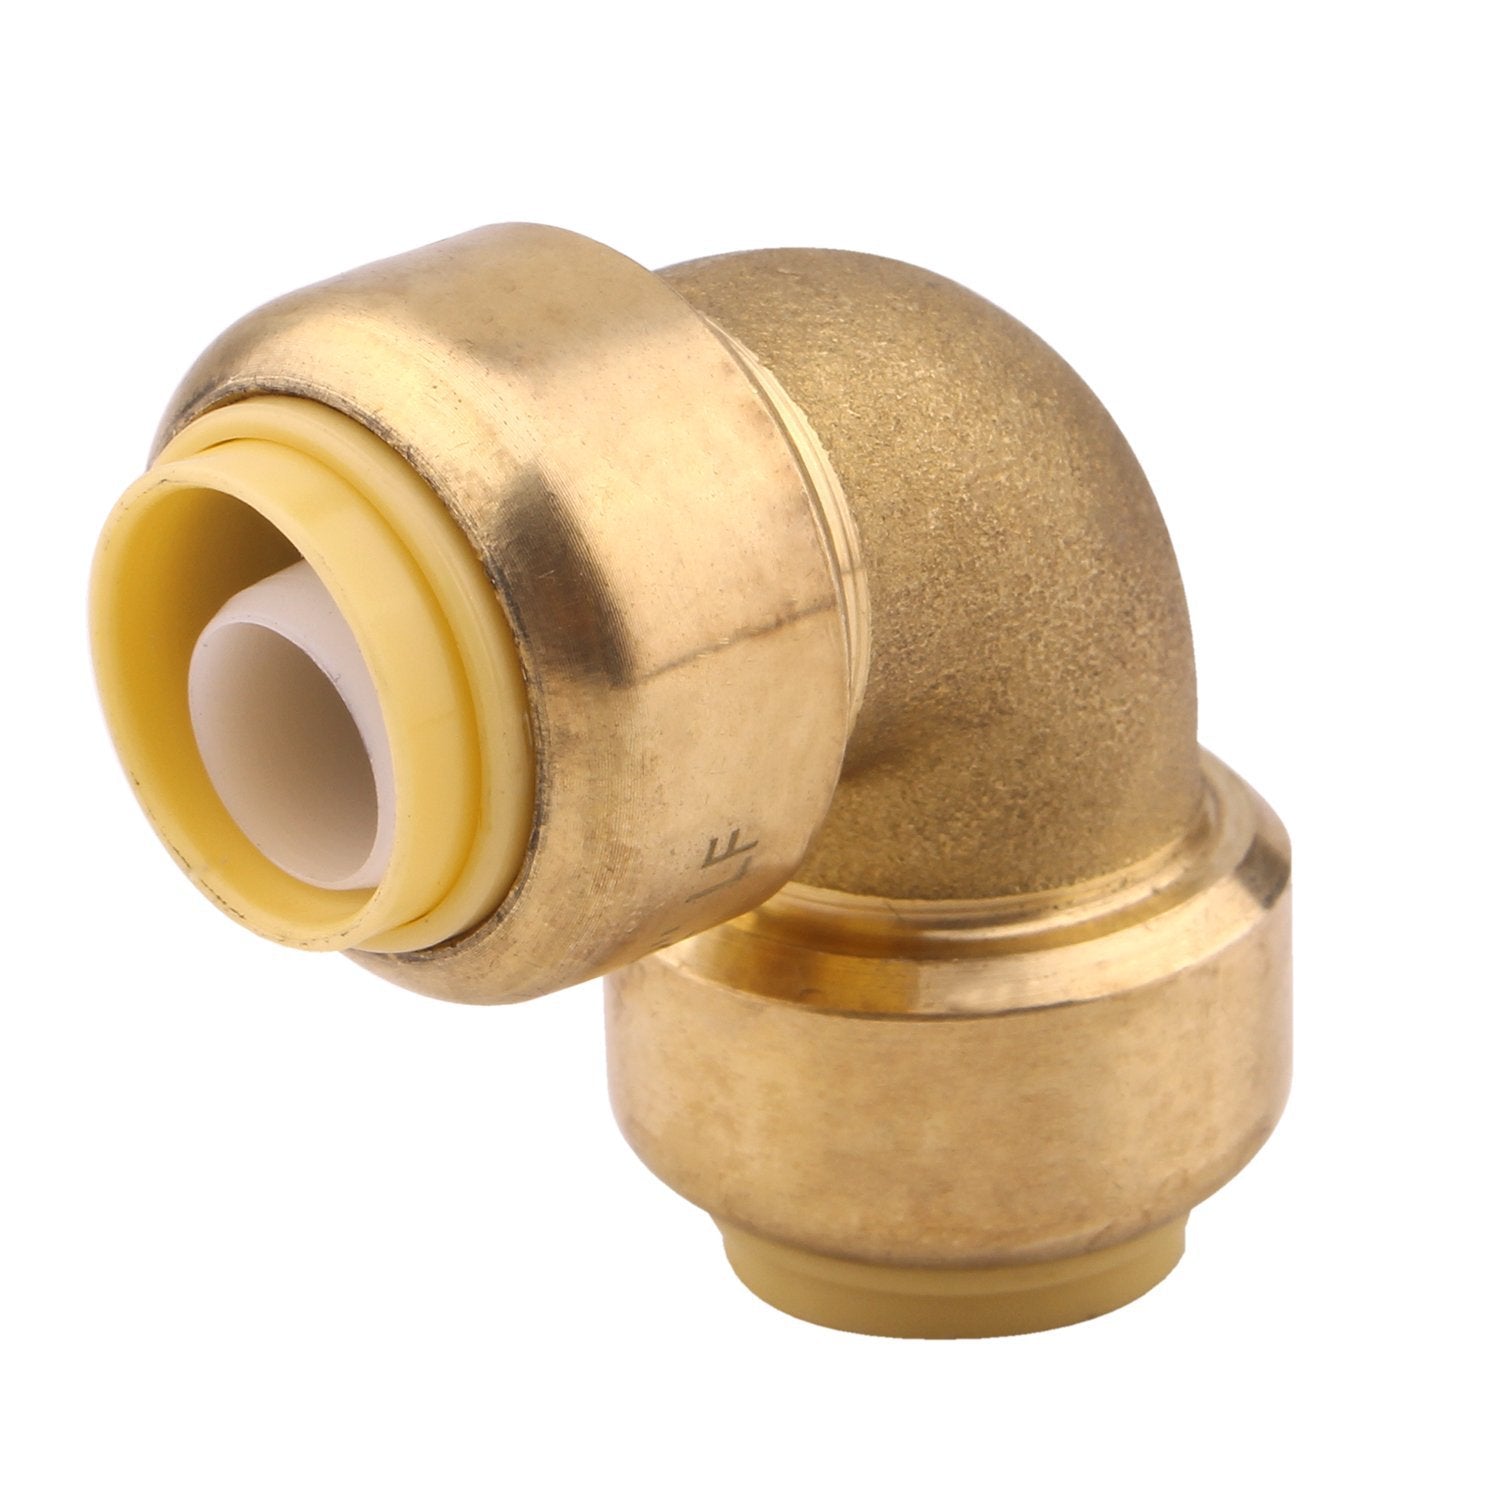 1/2-Inch 90-Degree Elbow,Push-to-Connect Plumbing Fittings with 1/2" Disconnect Clip